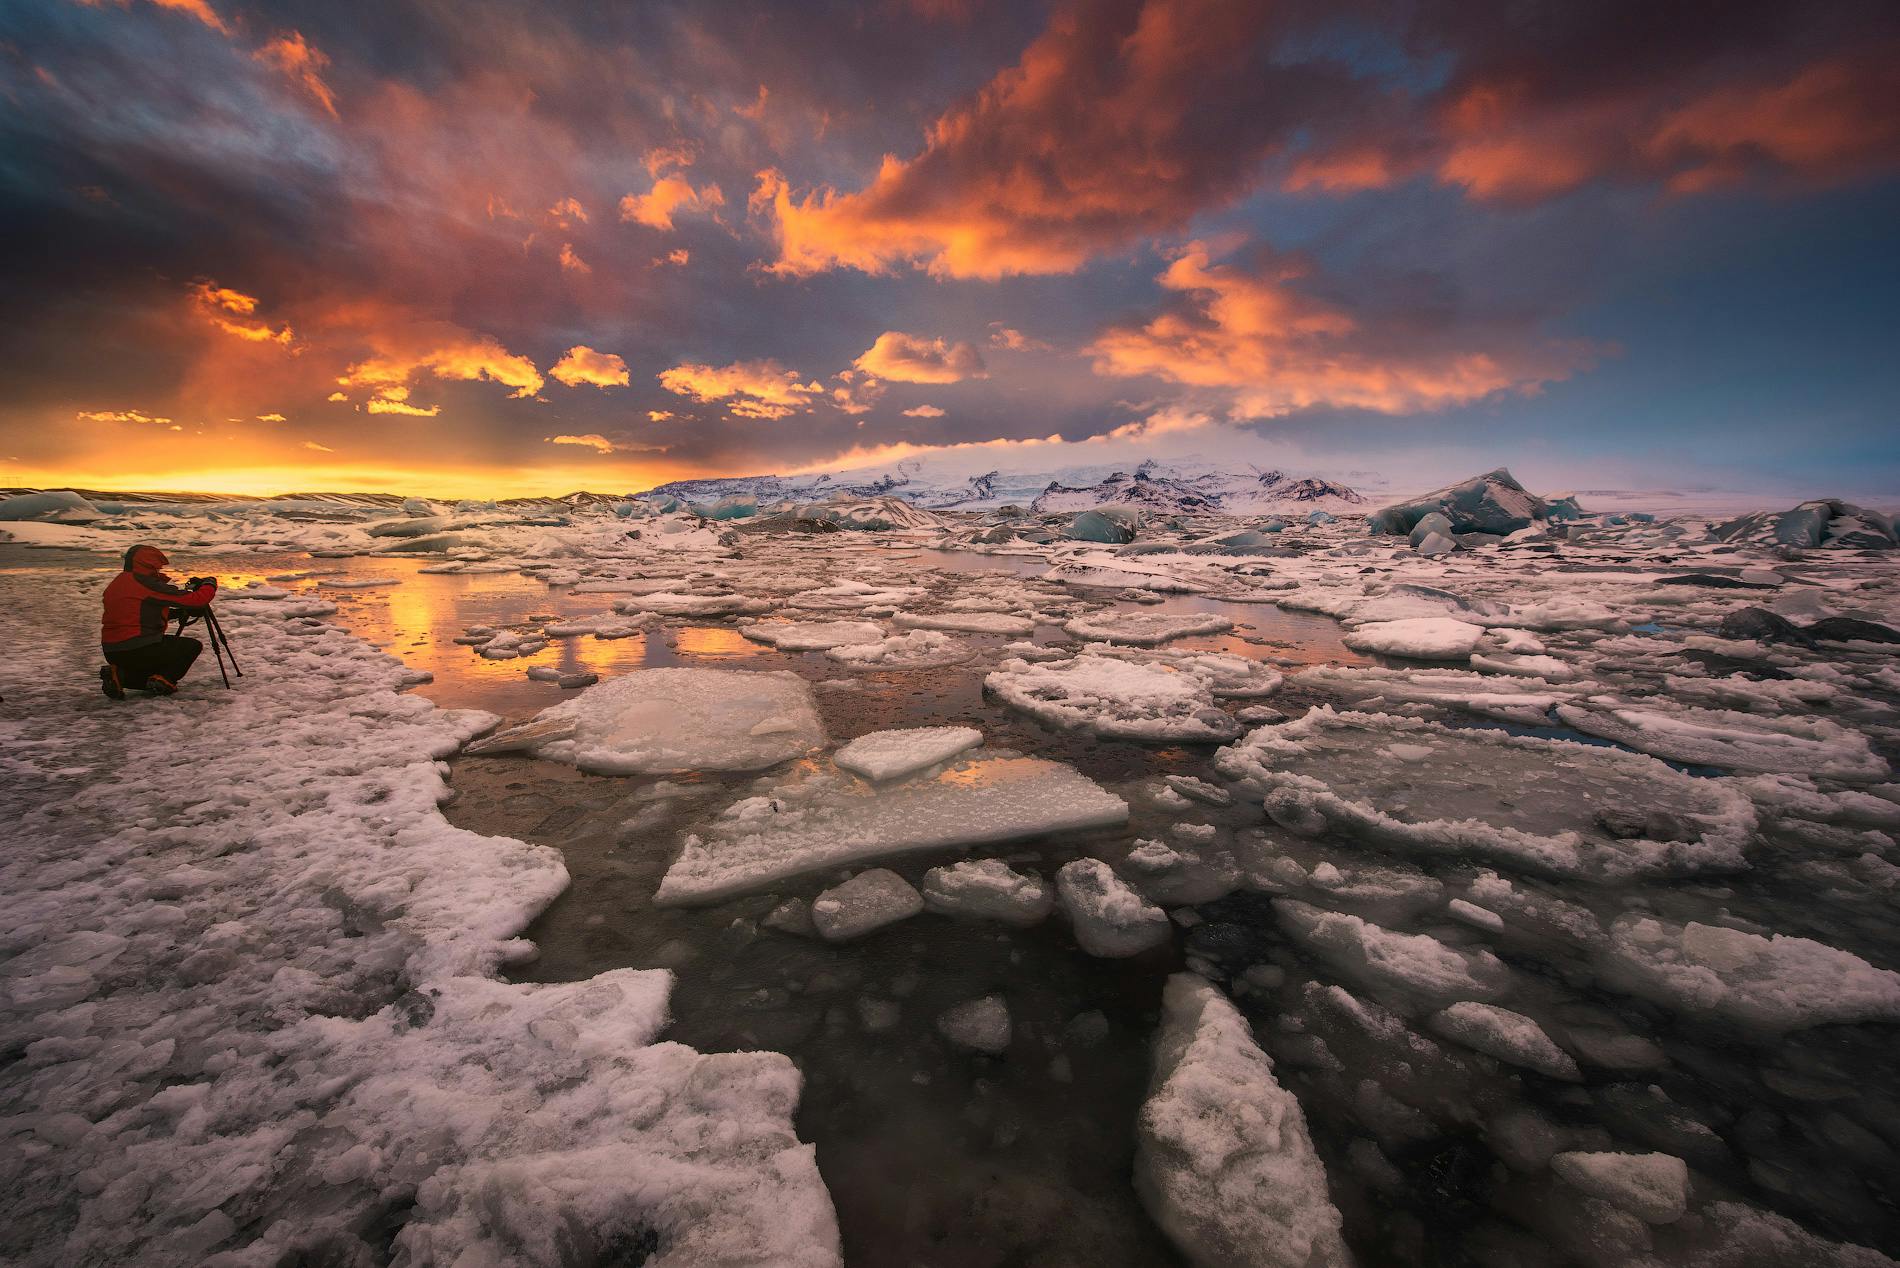 It's possible to spend several days taking pictures at Jökulsárlón glacier lagoon and no shot will be the same.